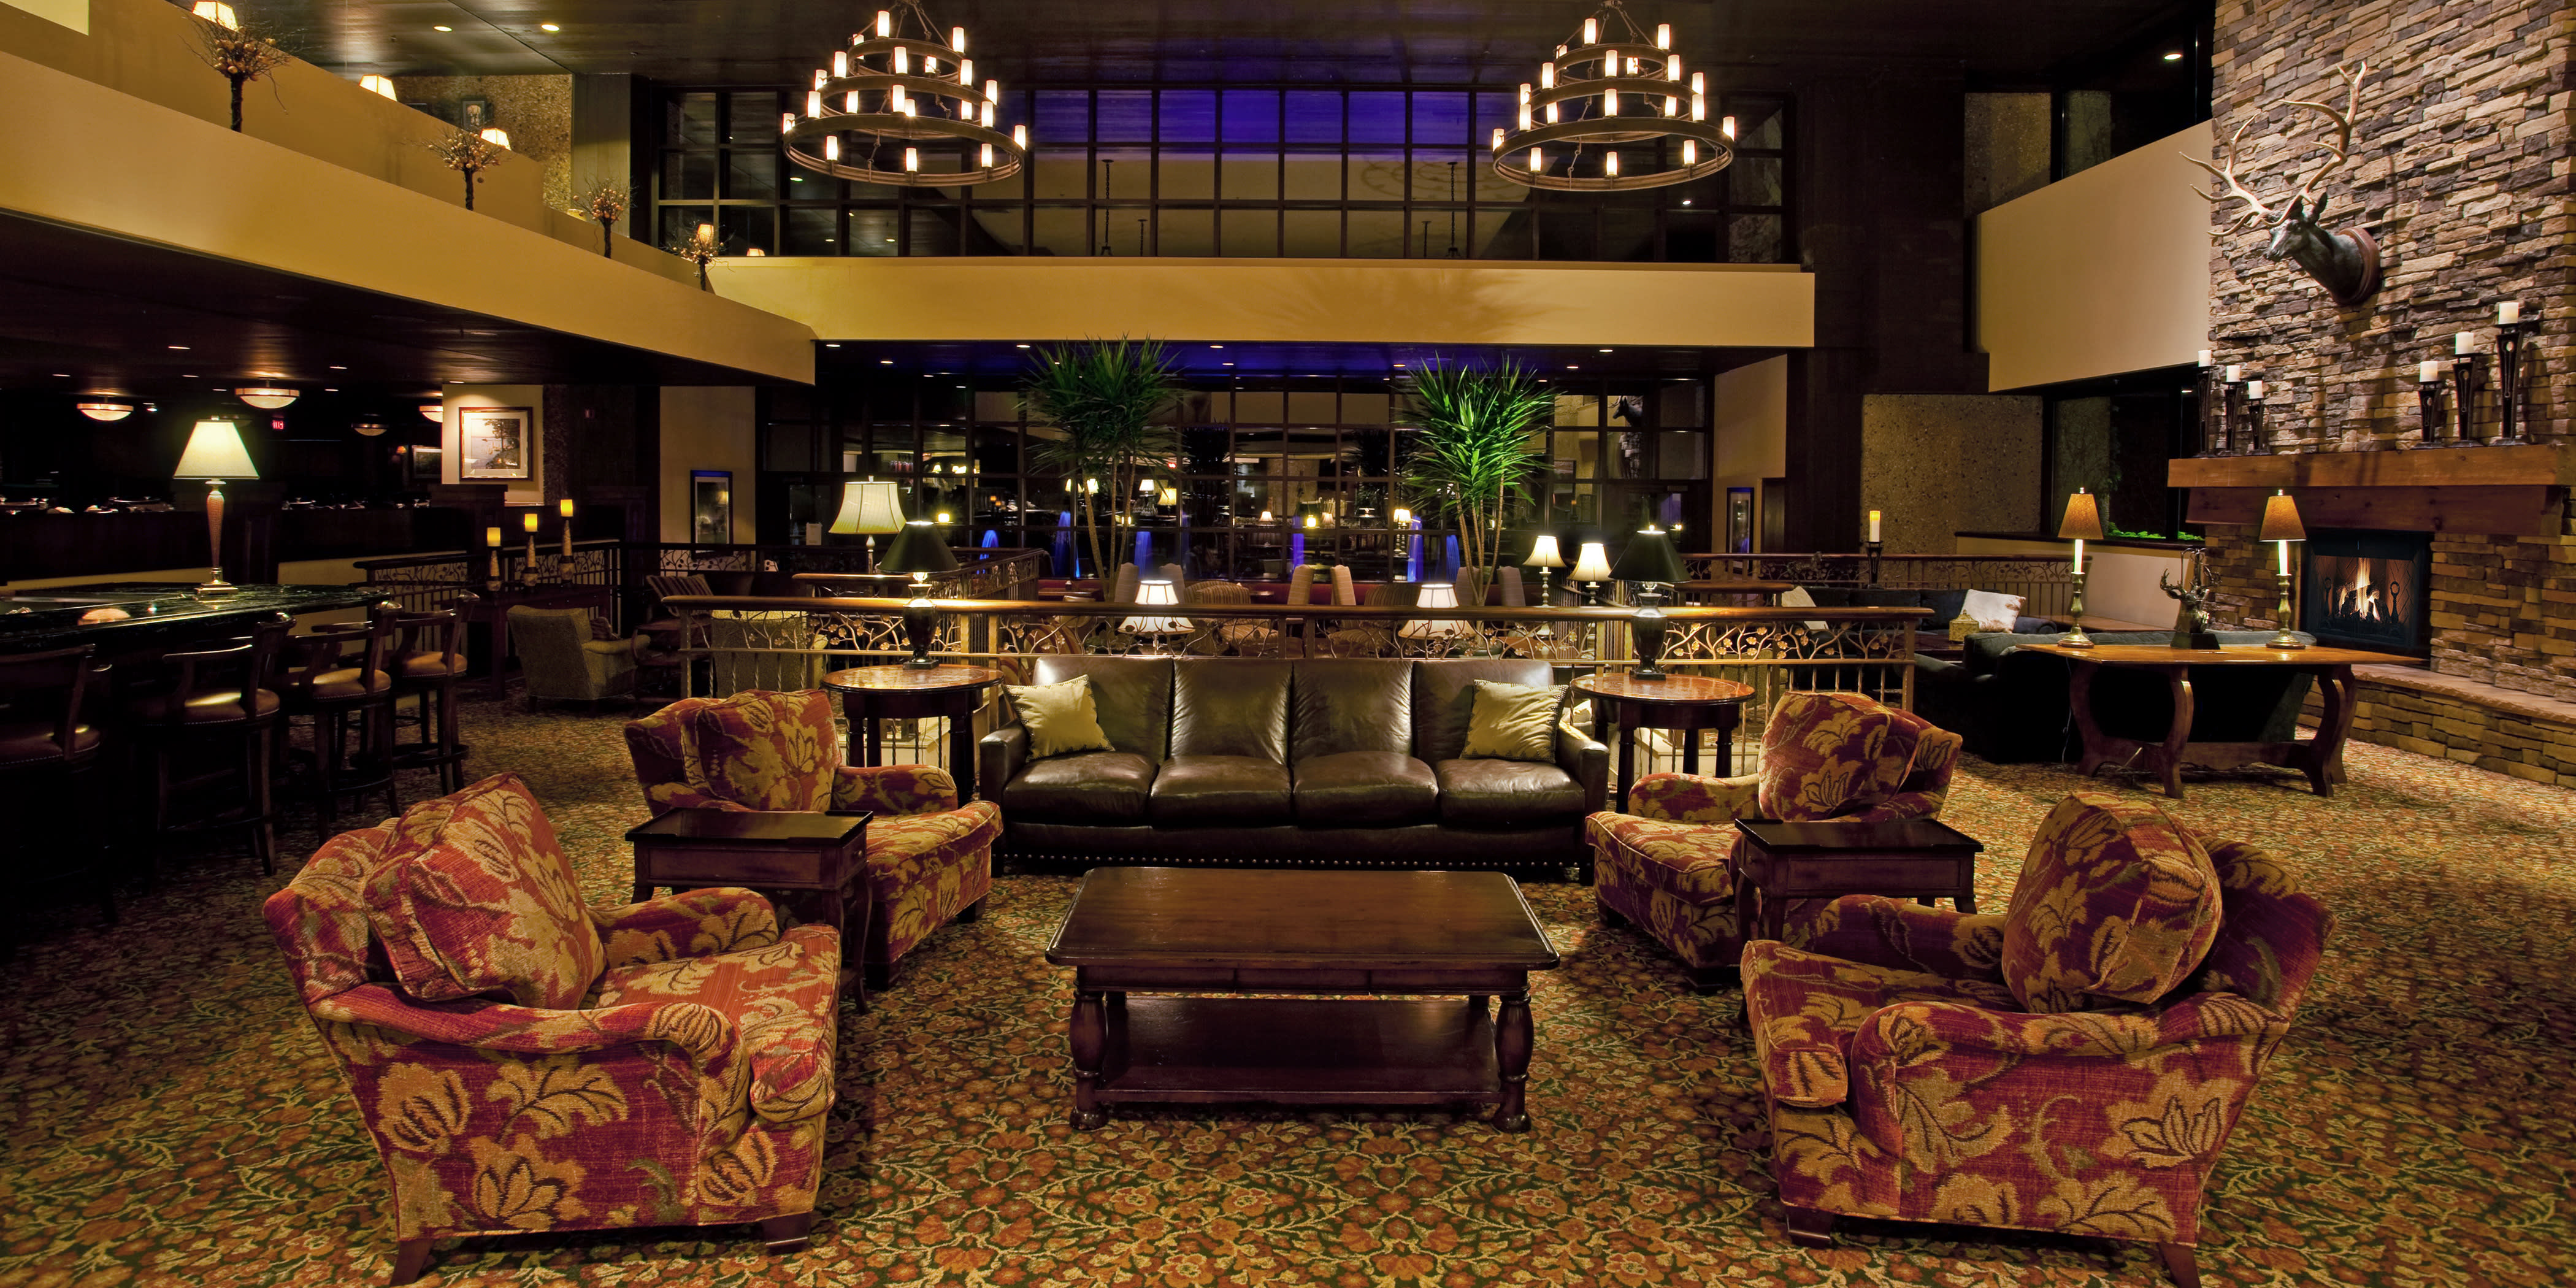 A large modern hotel lobby with a large stone fireplace adorn with a deer head